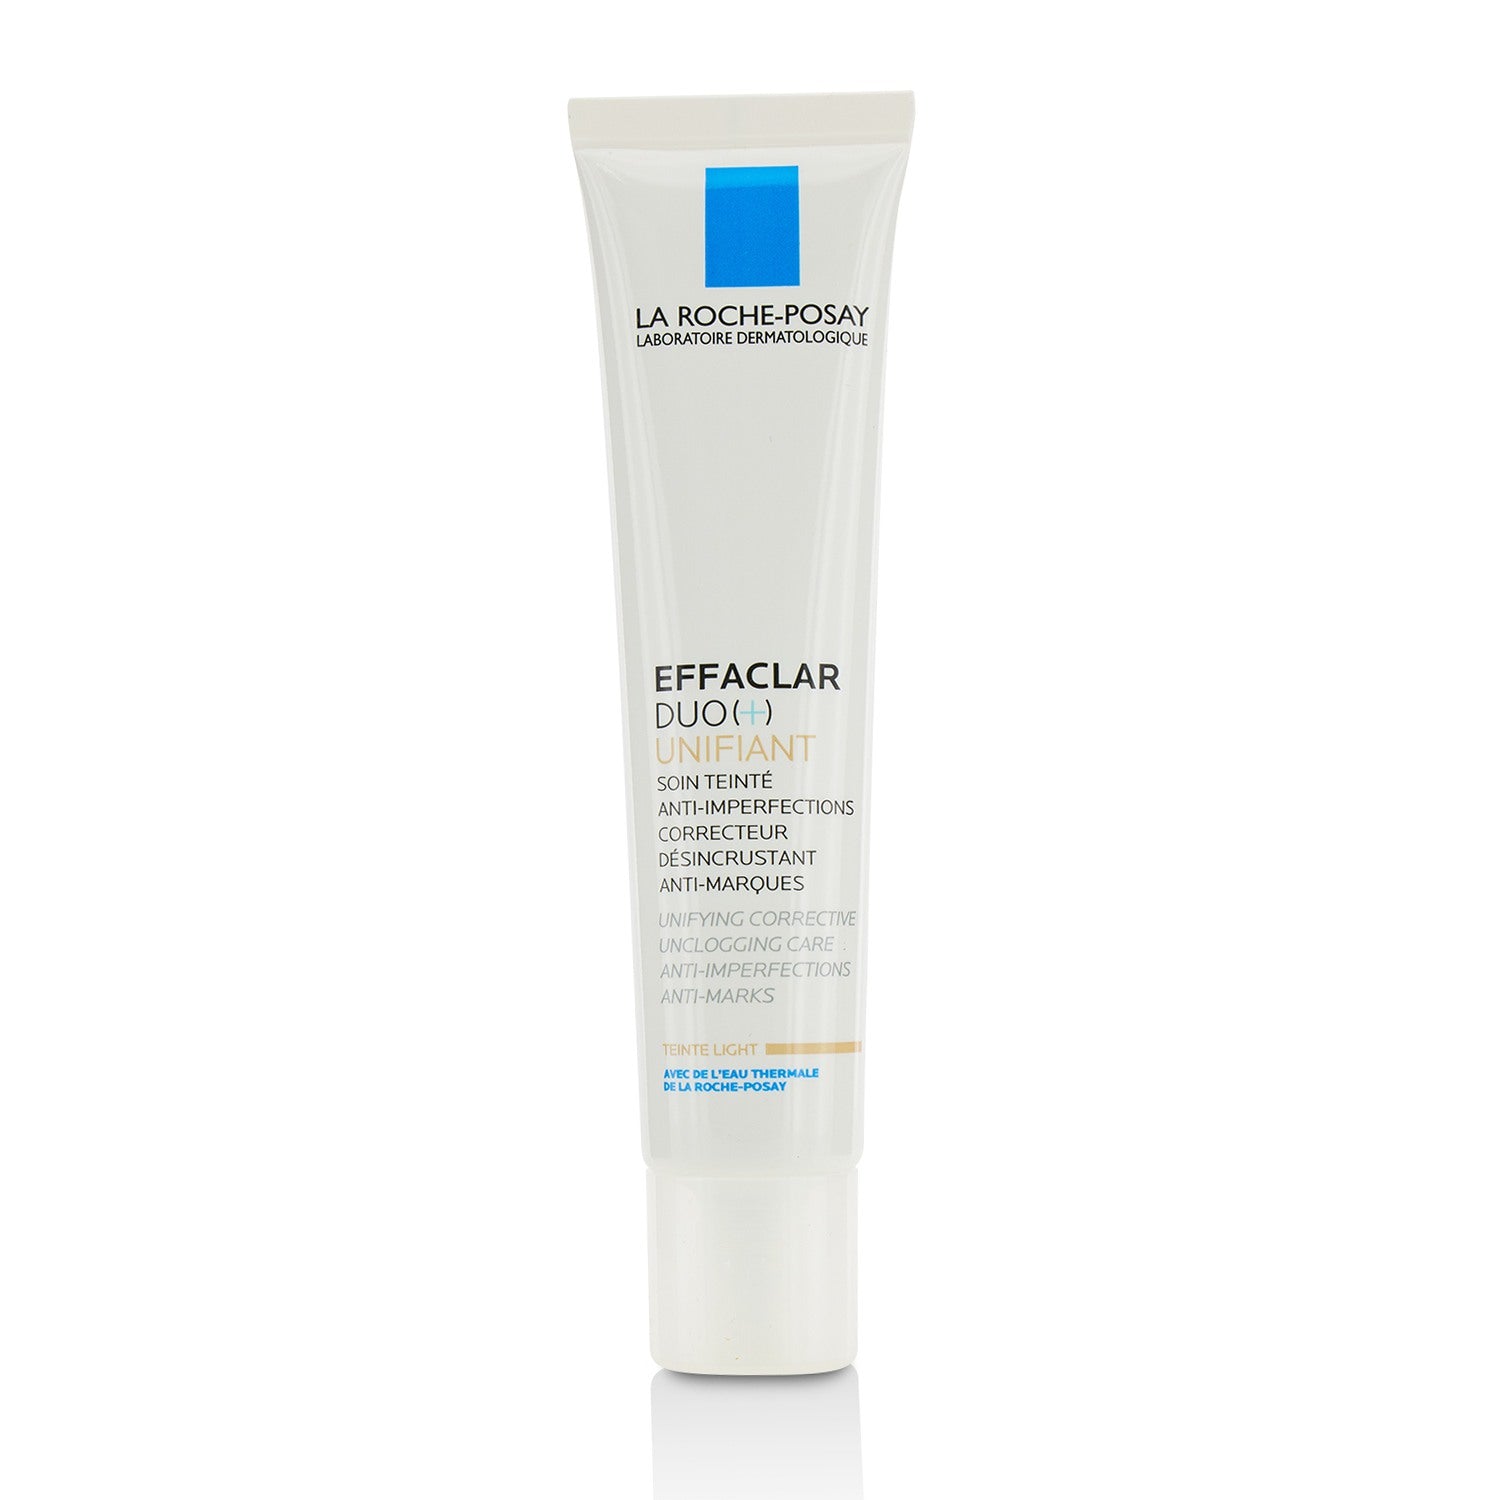 Effaclar Duo (+) Unifiant Unifying Corrective Care Anti-Imperfections Anti-Marks - Light for Sale | La Roche Posay, Skincare, Buy Now – Author